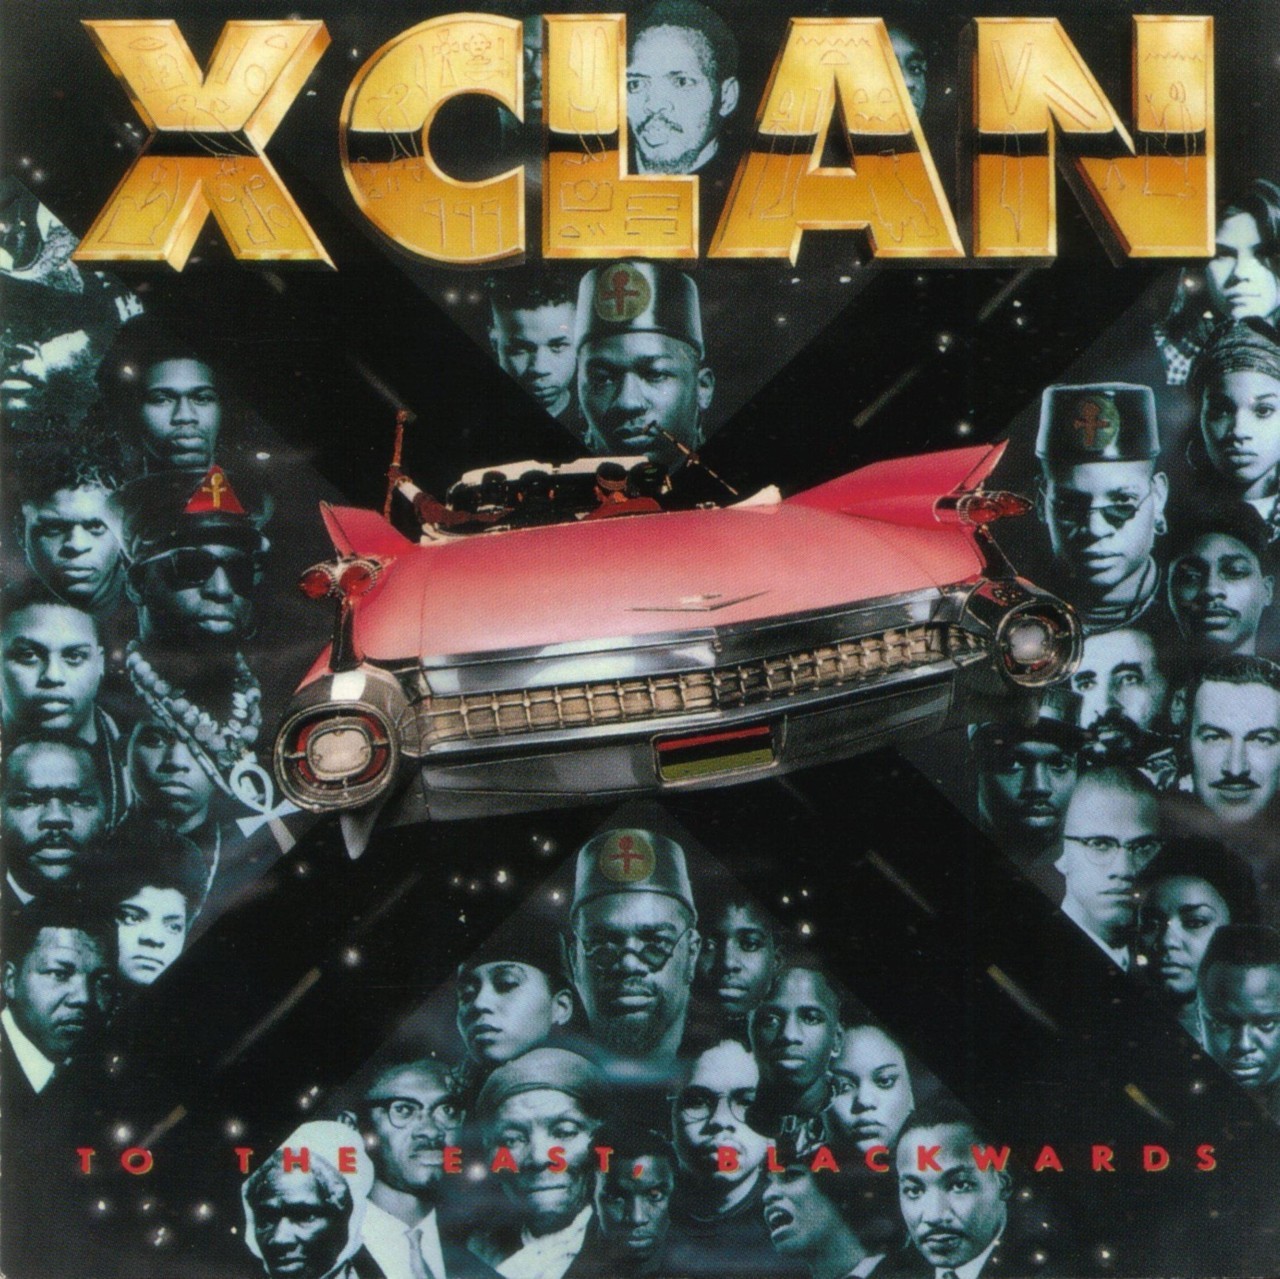 BACK IN THE DAY |4/17/90| X-Clan releases their debut album, To The East, Blackwards,